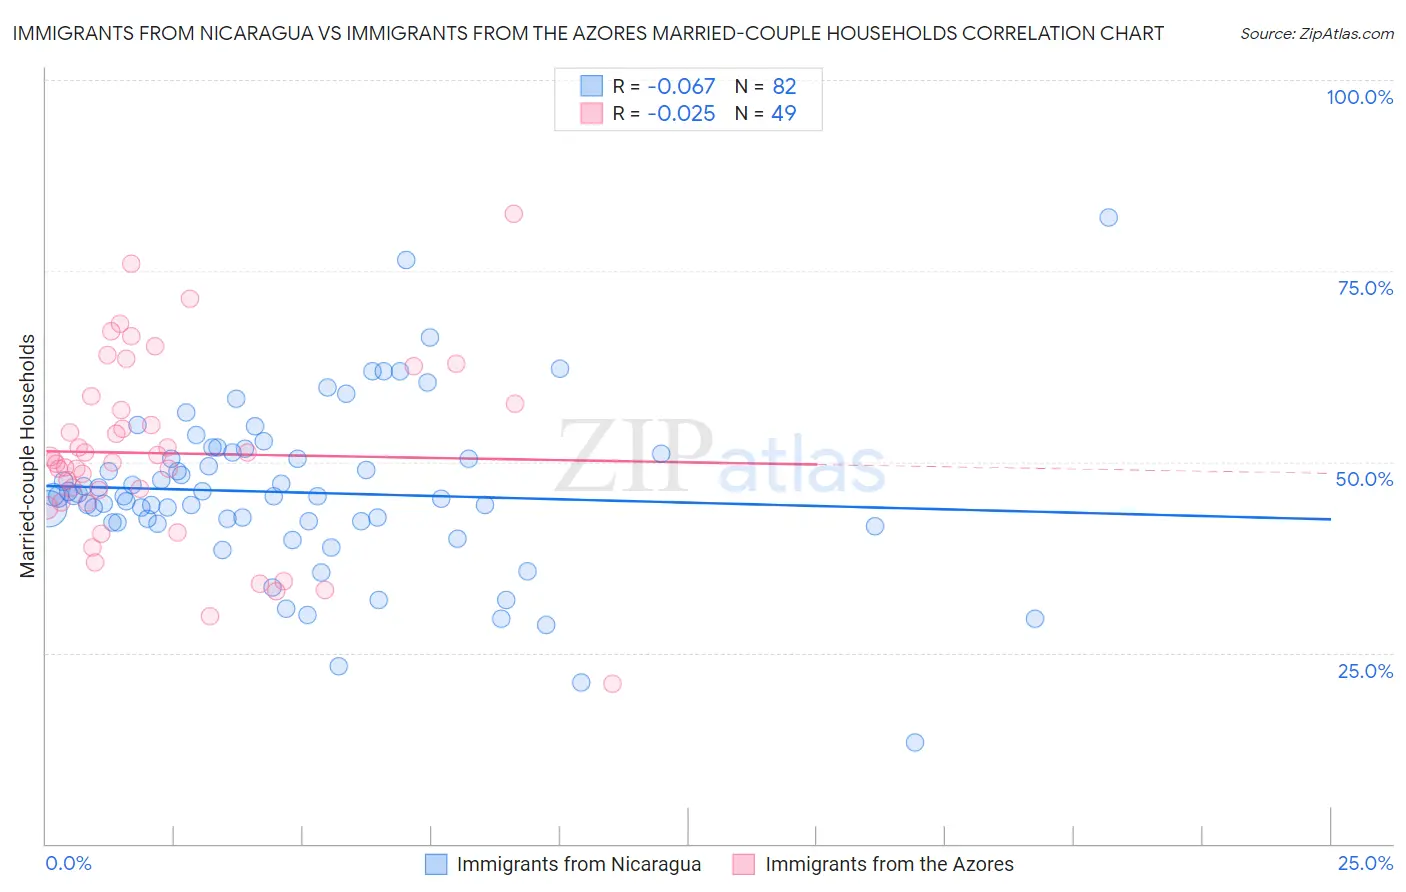 Immigrants from Nicaragua vs Immigrants from the Azores Married-couple Households